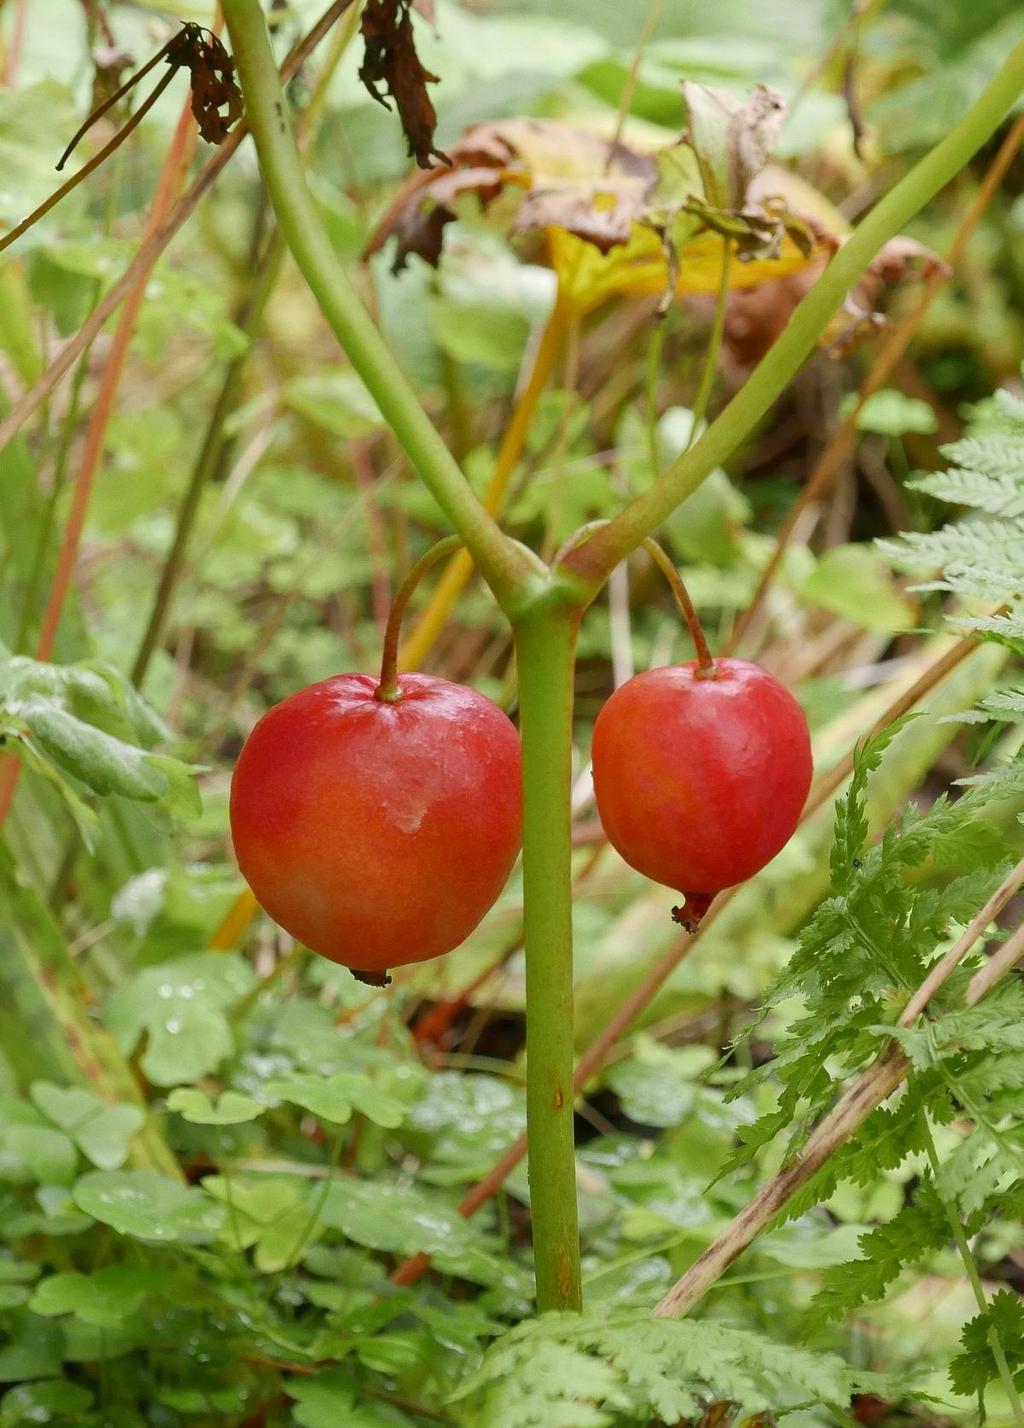 The large red fruits on Podophyllum hexandrum remind us